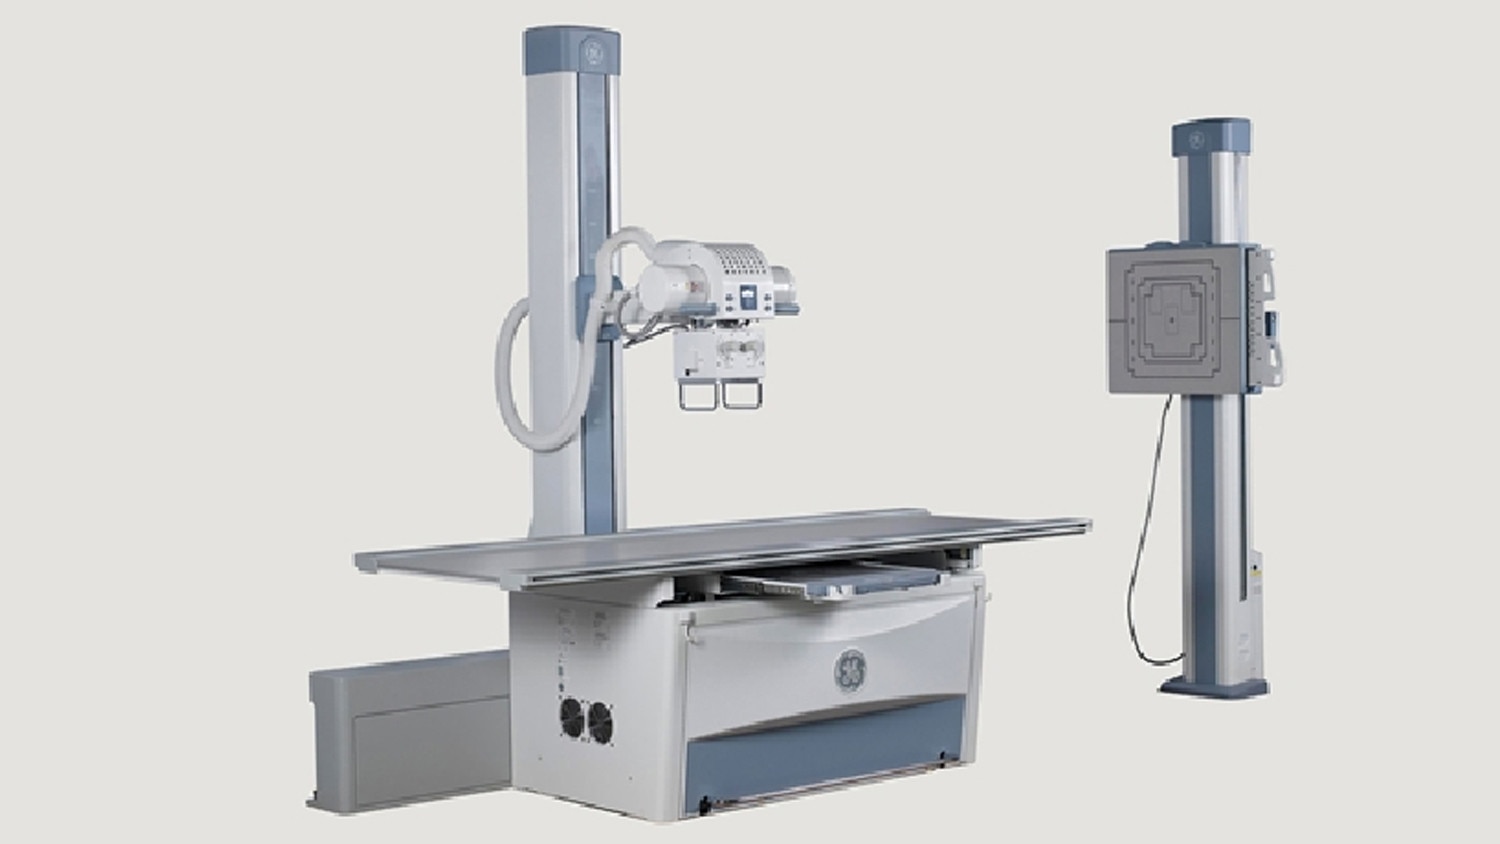 education-product-education-clinical-tip-applications-x-ray-brivo-xr385-system_jpg